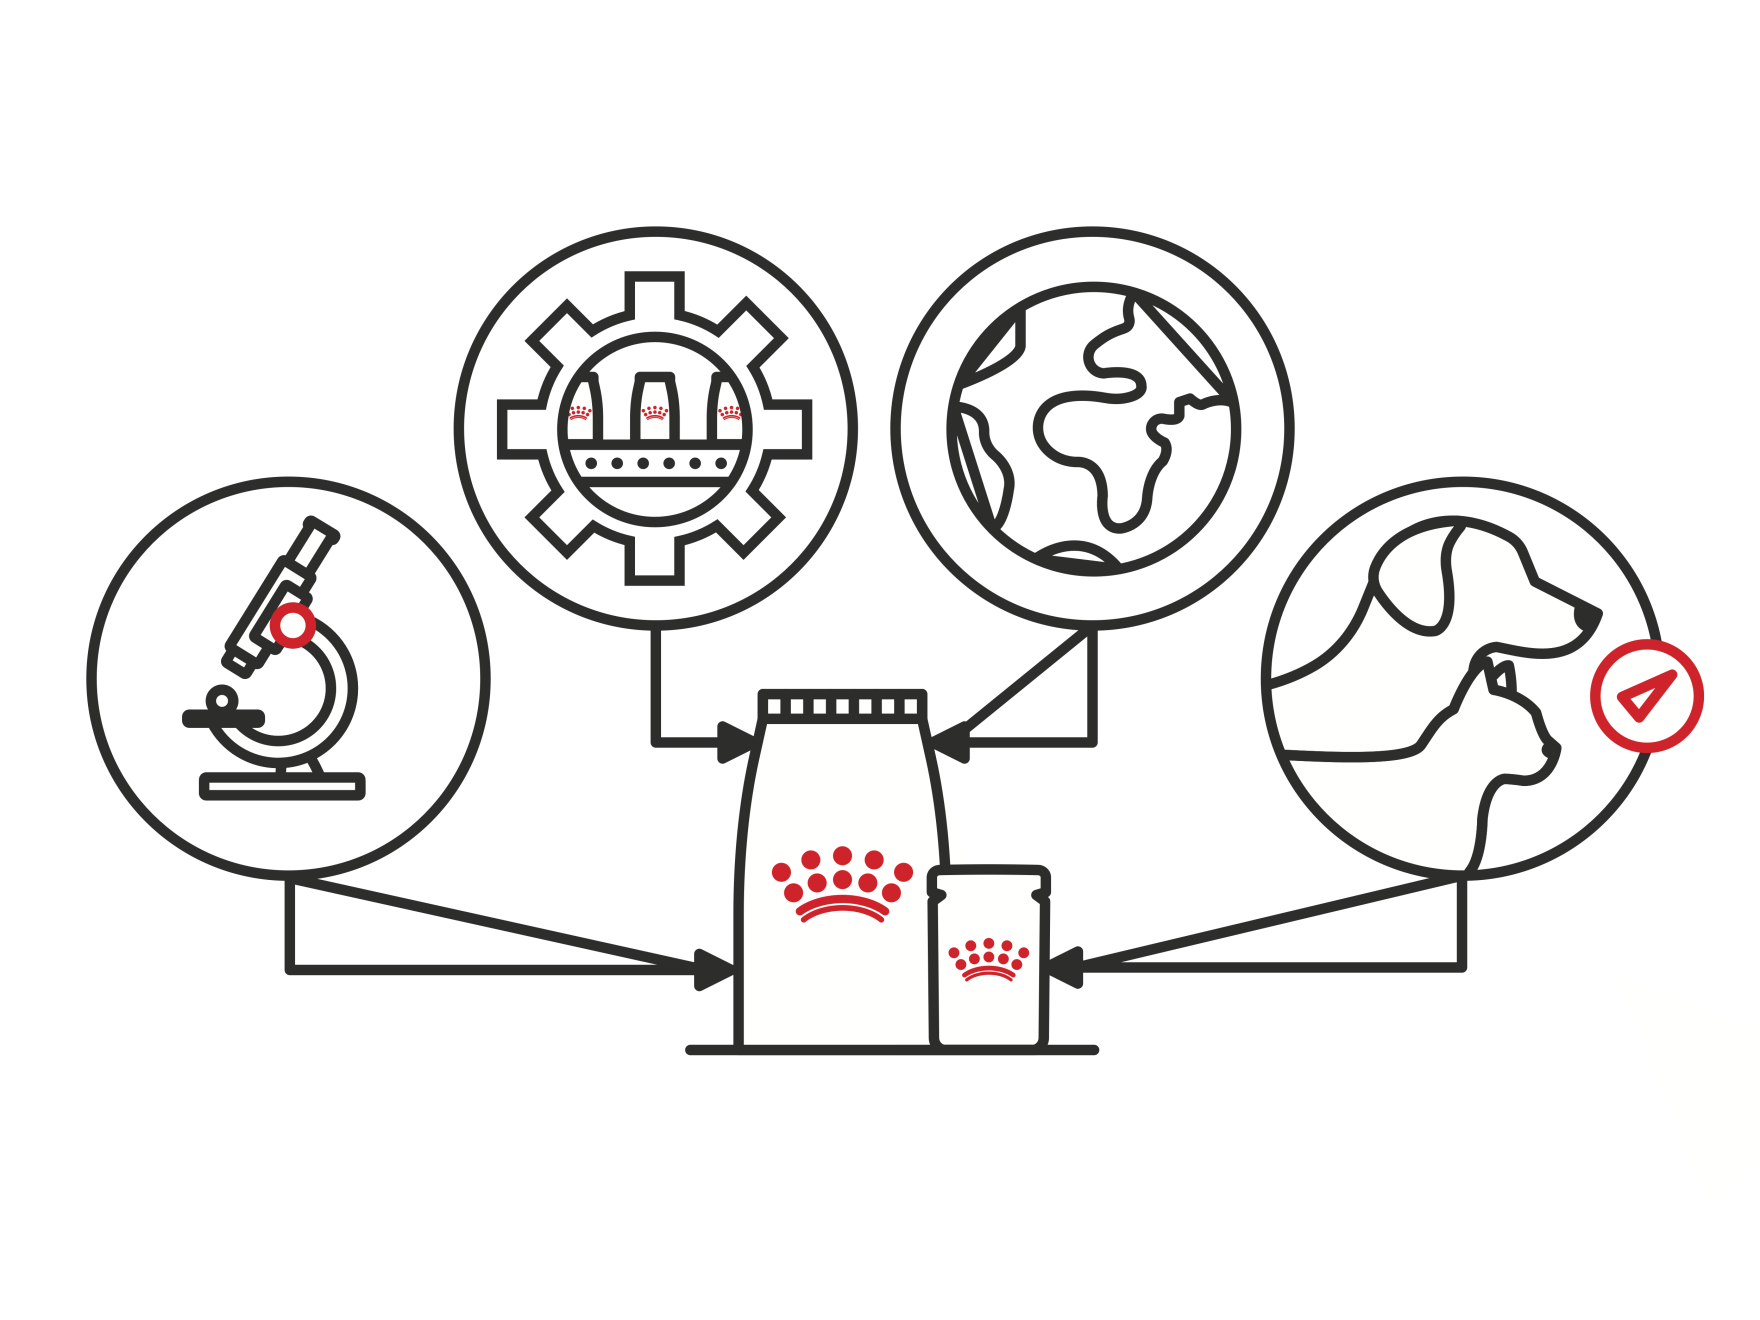 Process of quality ingredients and nutrients of Royal Canin products